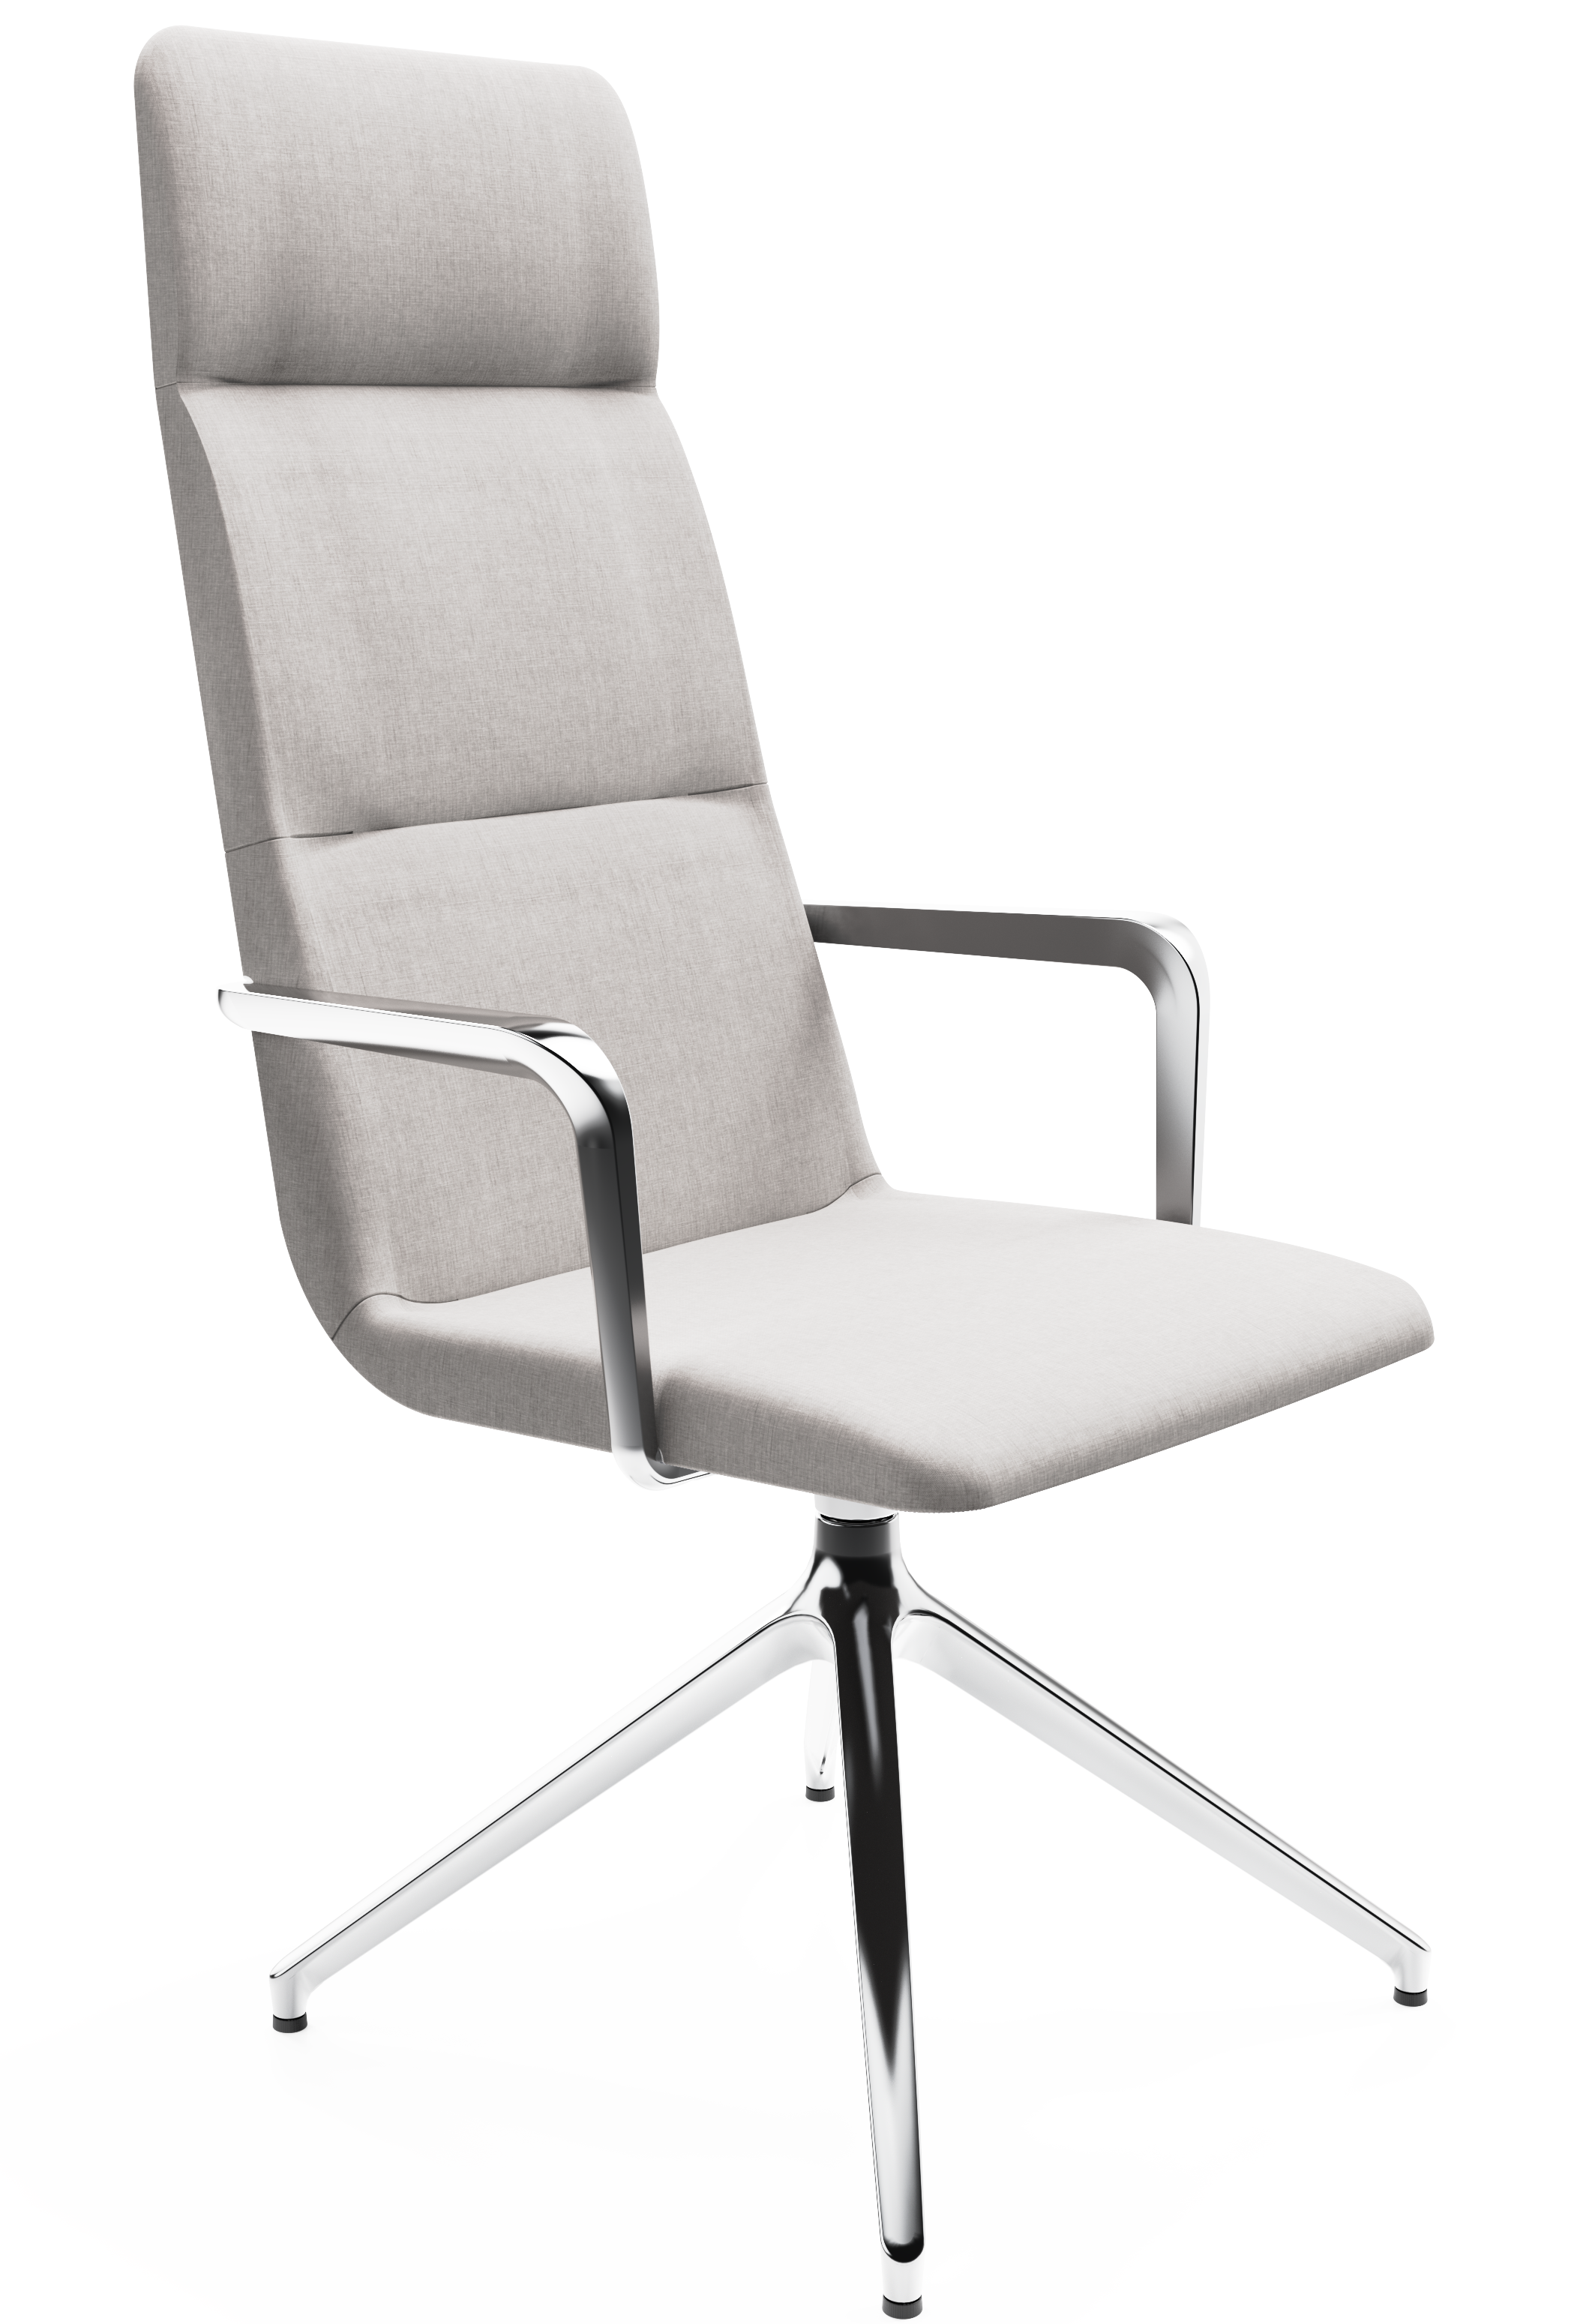 WS - Accord arms high 4 star base chair - chrome - remix 126 - front angle